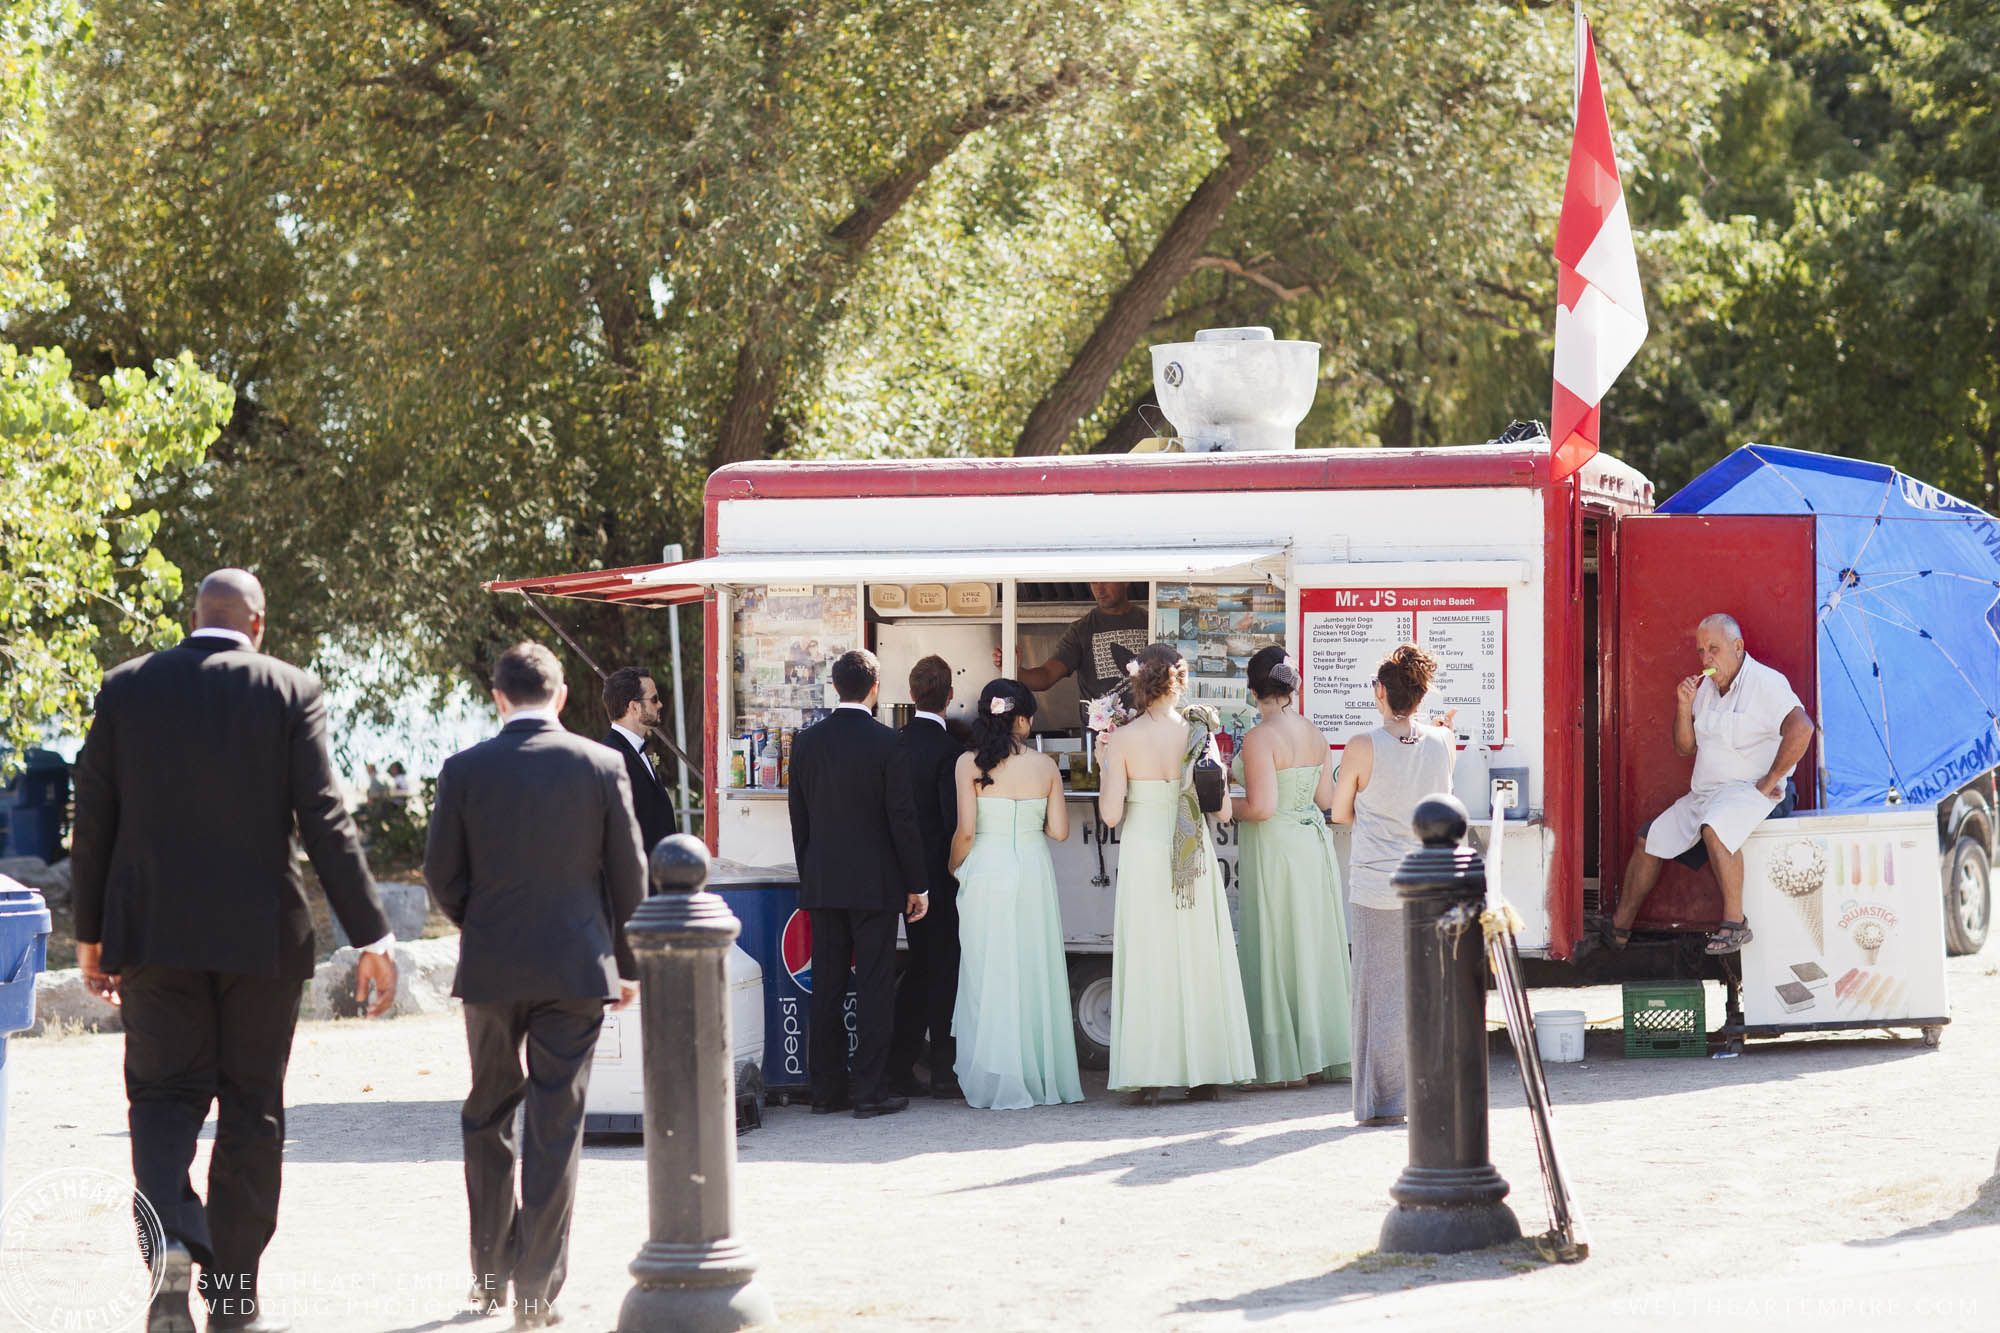 Bridal party visiting a wedding day food truck.